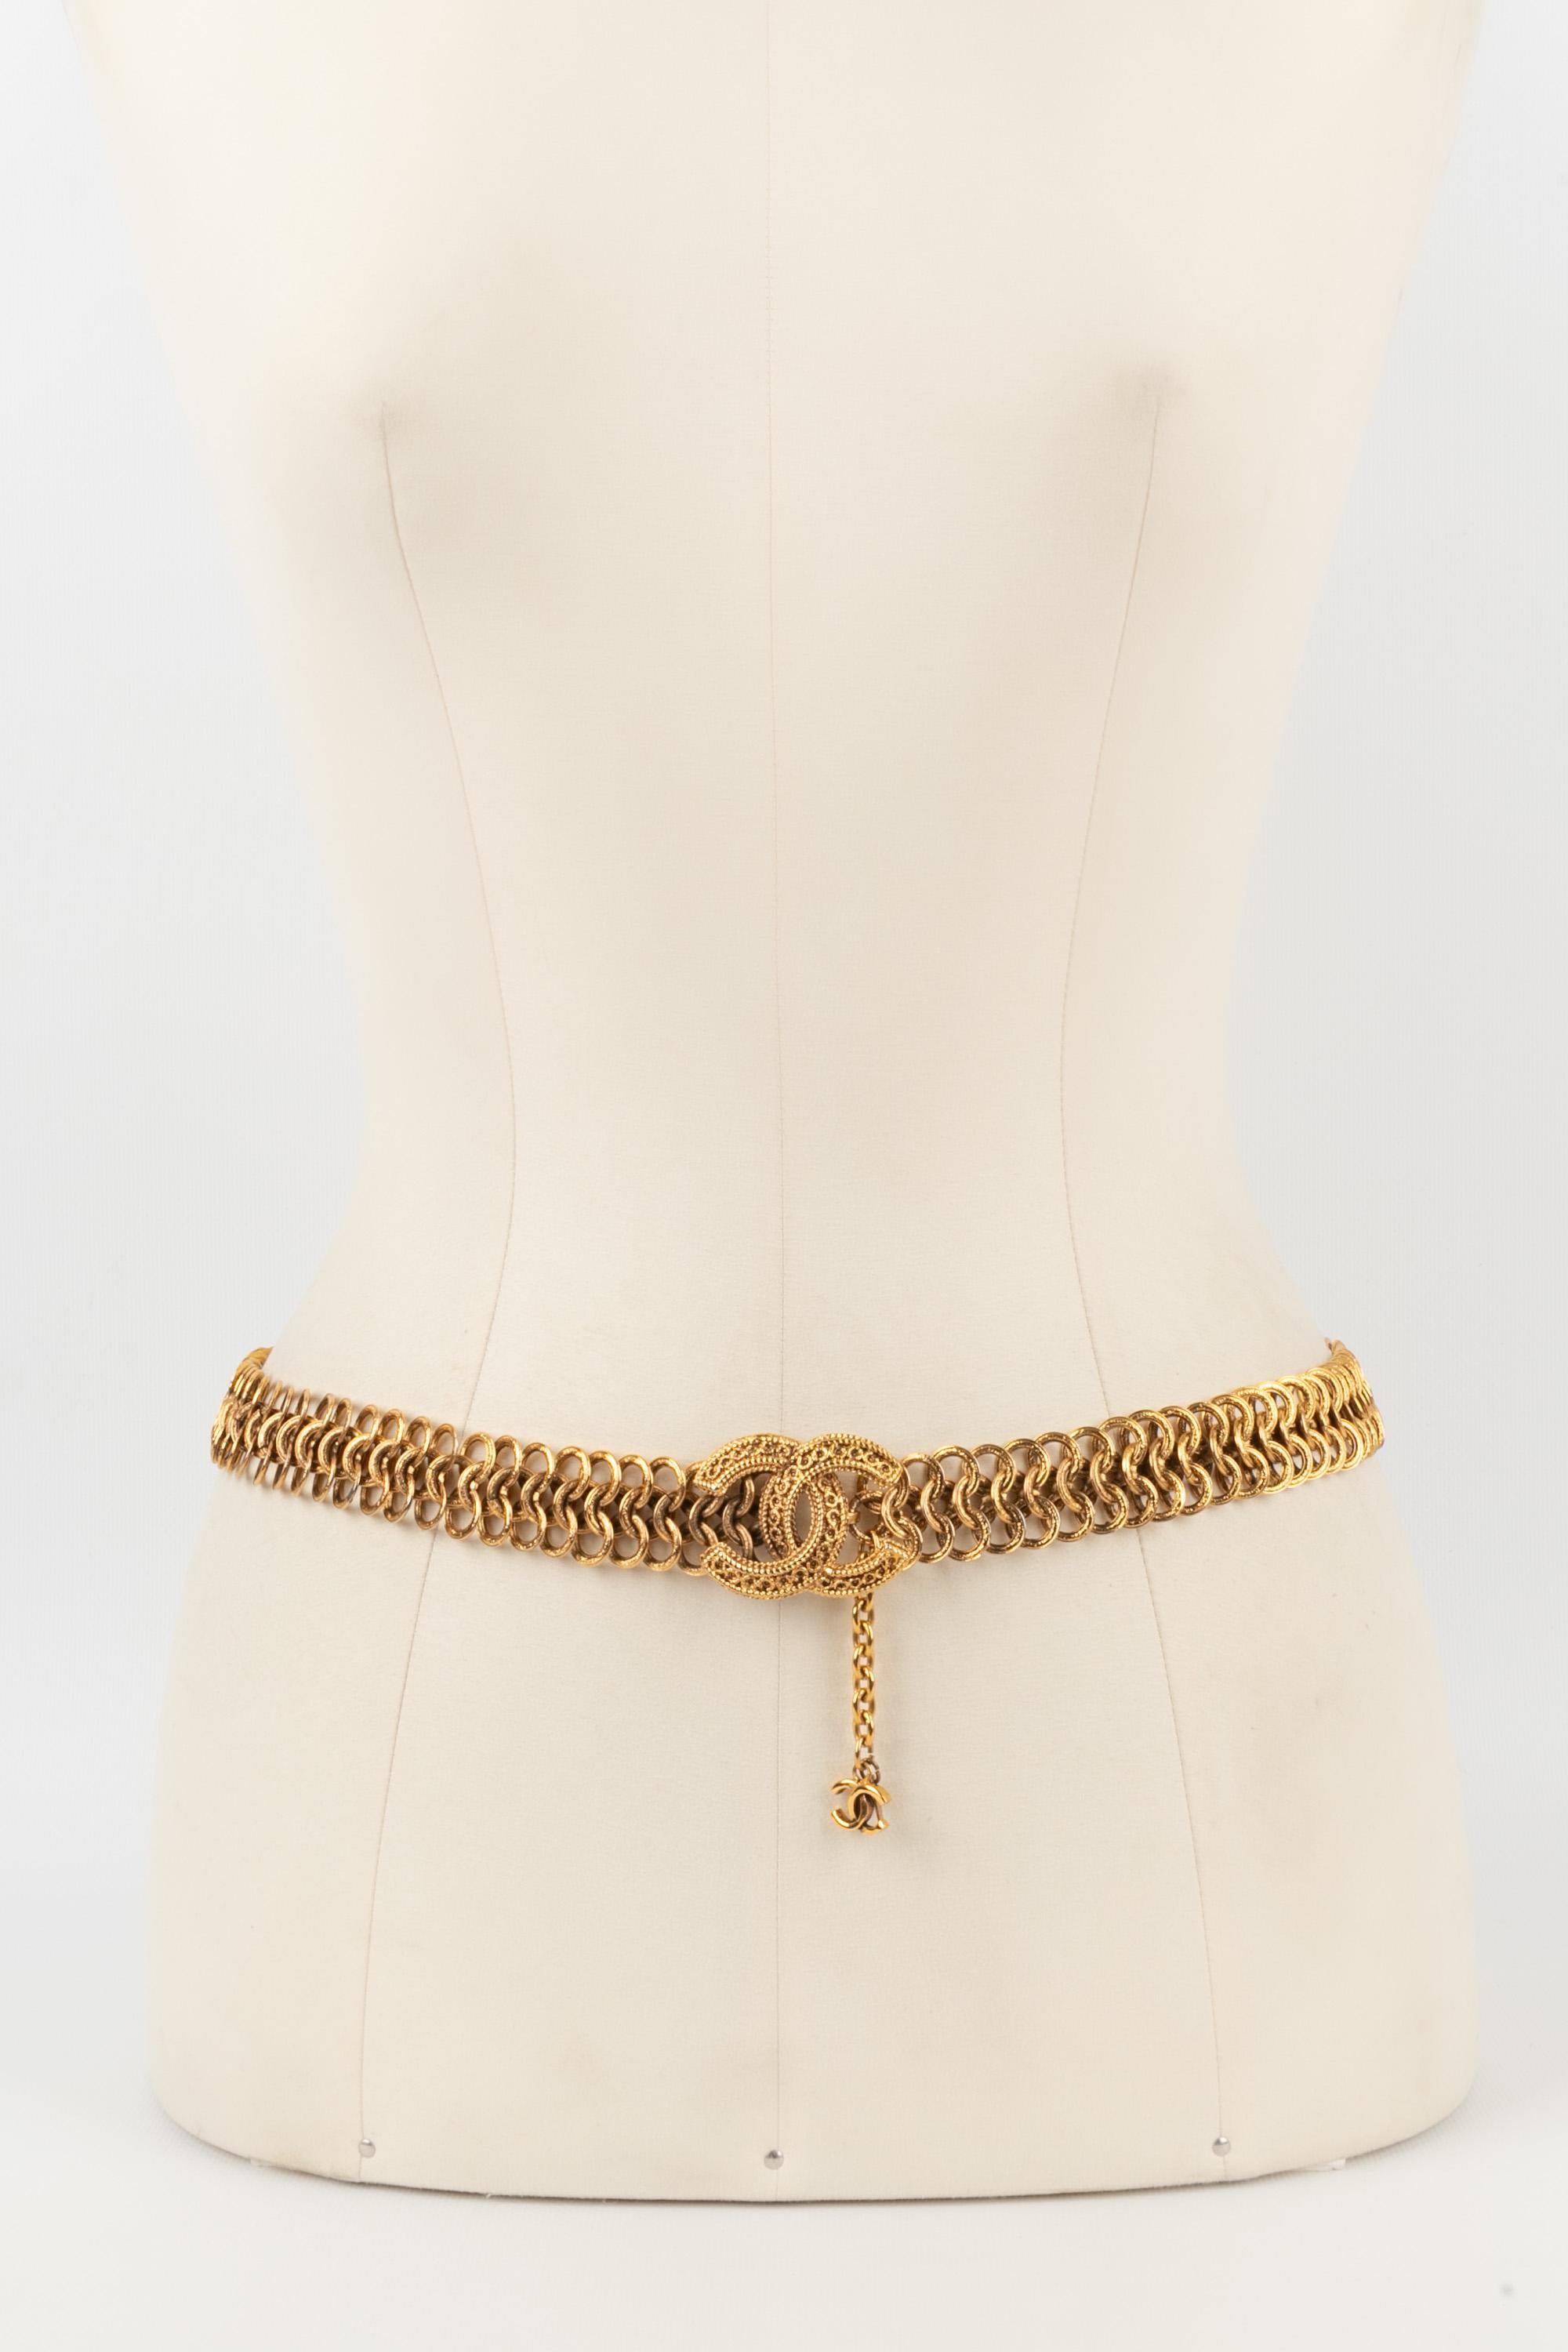 CHANEL - (Made in France) Flexible golden metal belt from the middle of the 1980s.

Condition:
Very good condition

Dimensions:
Length: from 73 cm to 78 cm

CCB15